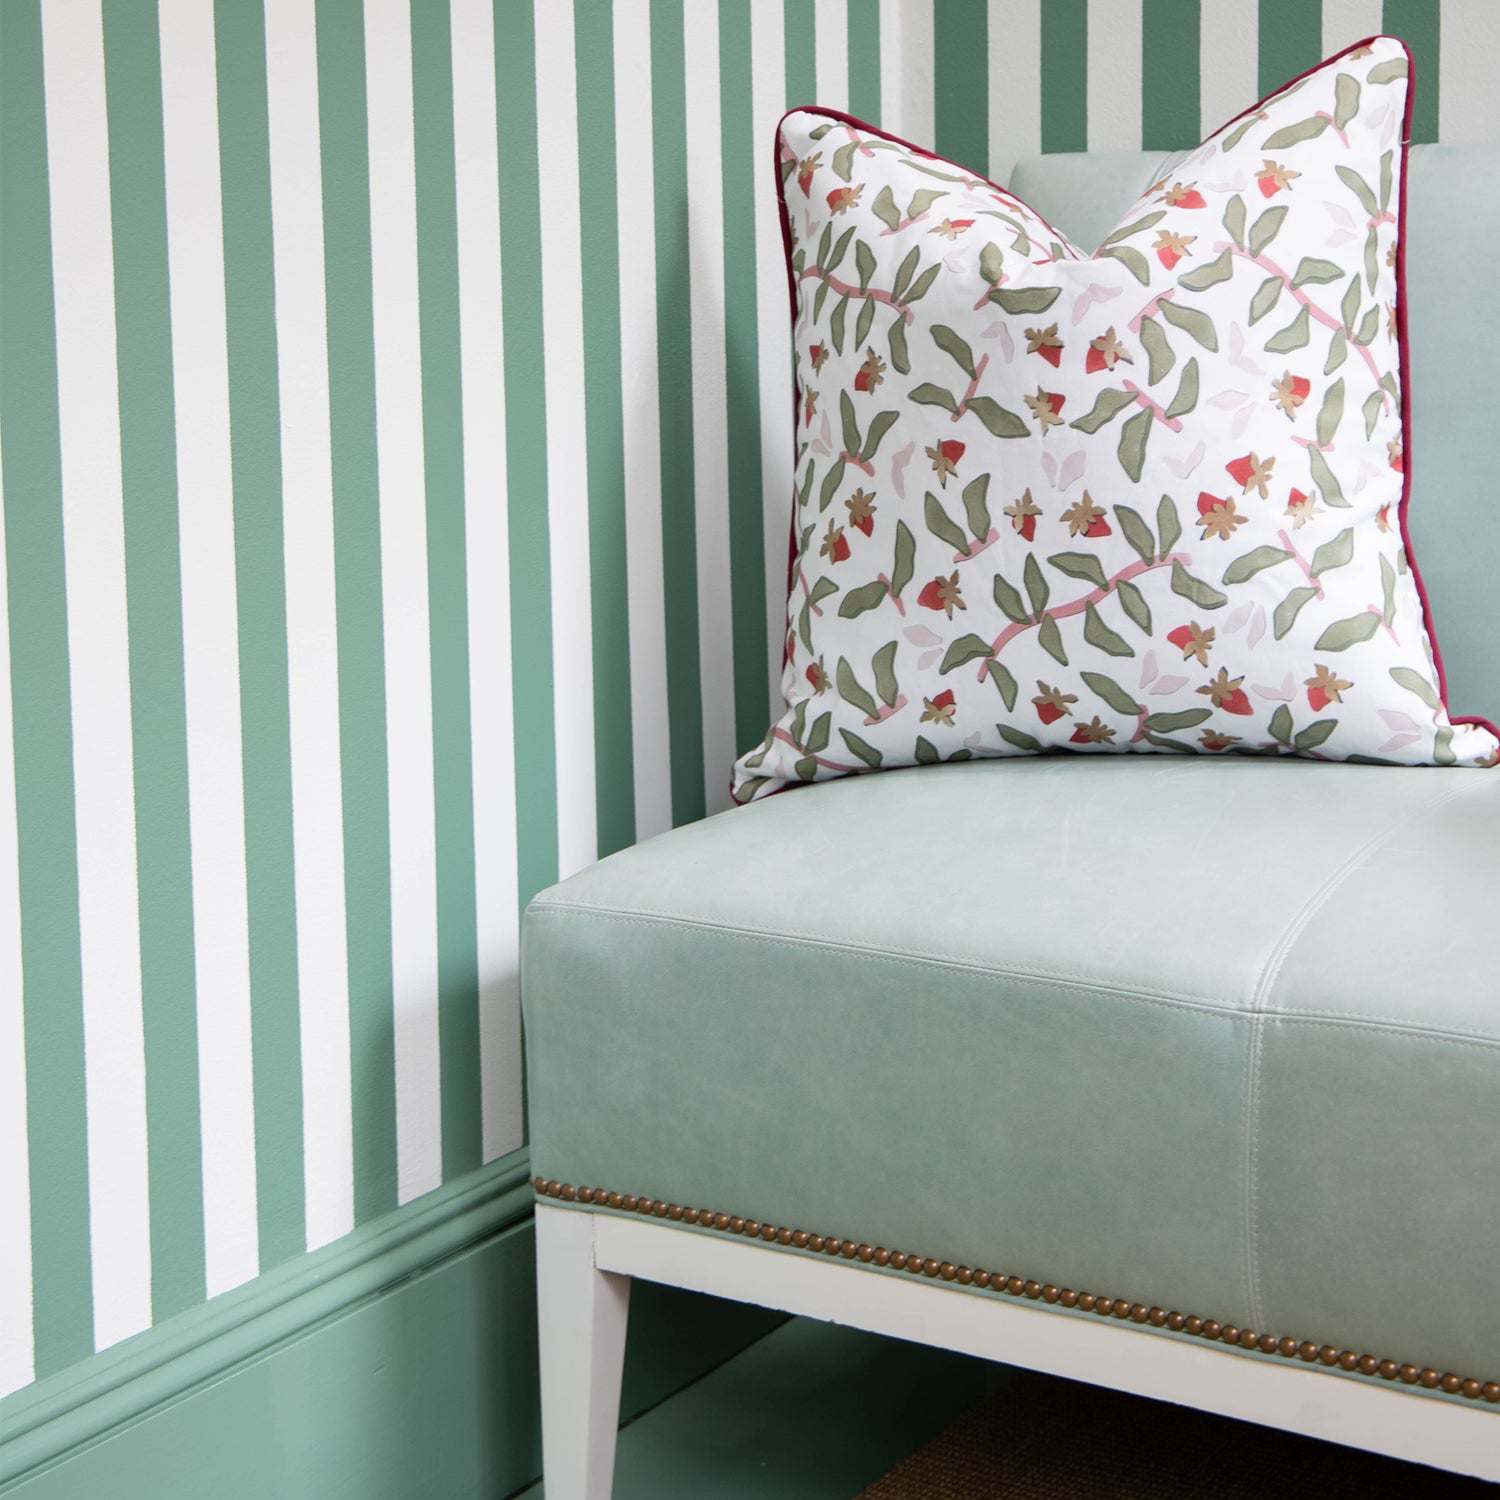 Corner with green and white striped wallpaper styled with a Strawberry & Botanical Printed Pillow on Green Leather Couch